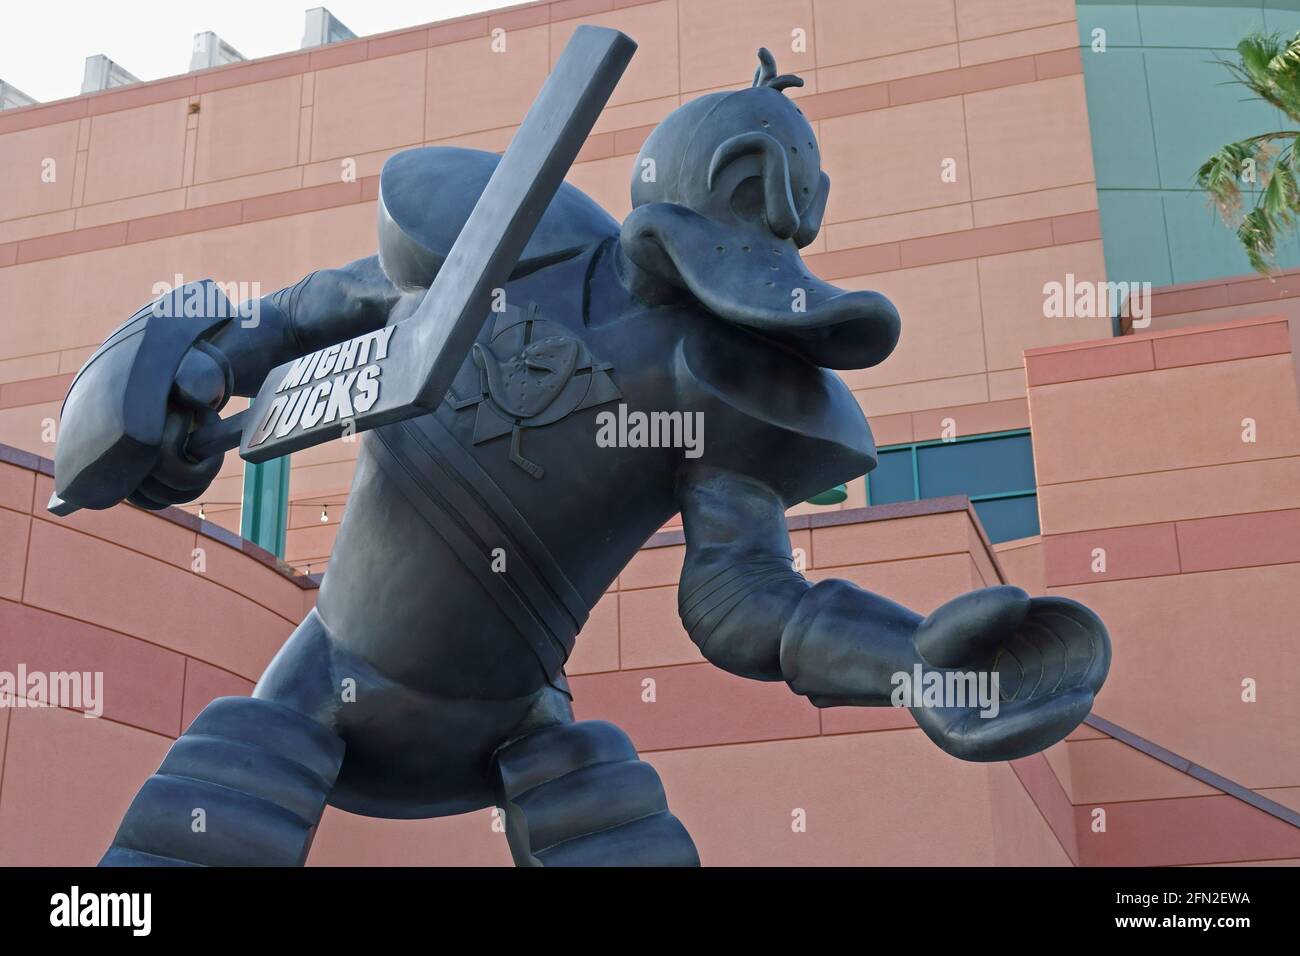 Anaheim, CA / USA - May 12, 2019: A statue by artist Stephen Landis, entitled “Defending the Pond,” is shown outside the Honda Center (home of the Ana Stock Photo